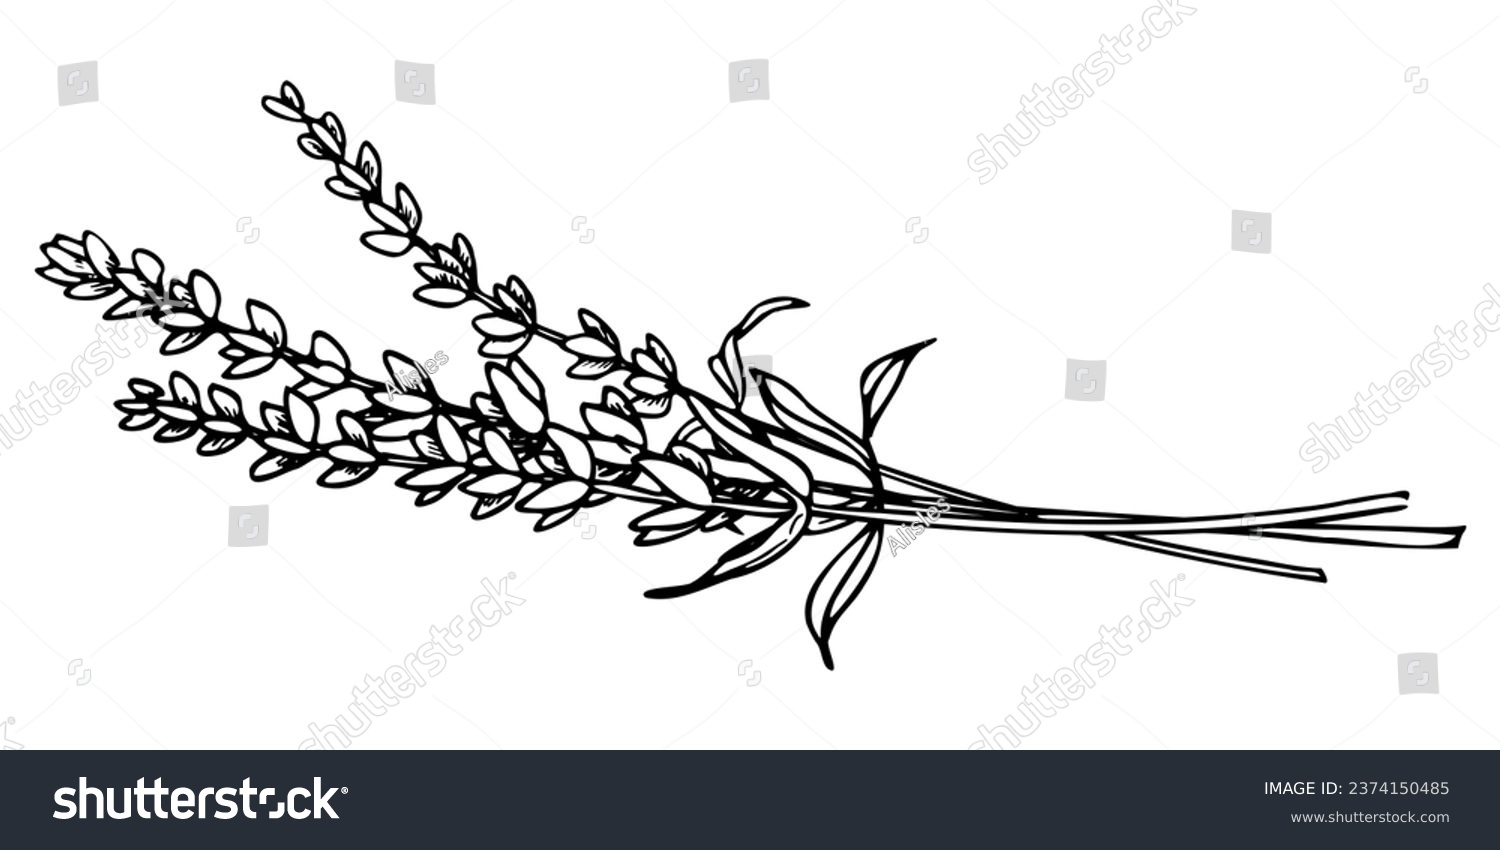 SVG of Bouquet of Lavender Flowers. Hand drawn vector illustration of Provence herbs on isolated background. Drawing for greeting cards or wedding invitations in line art style. Engraved floral sketch. svg